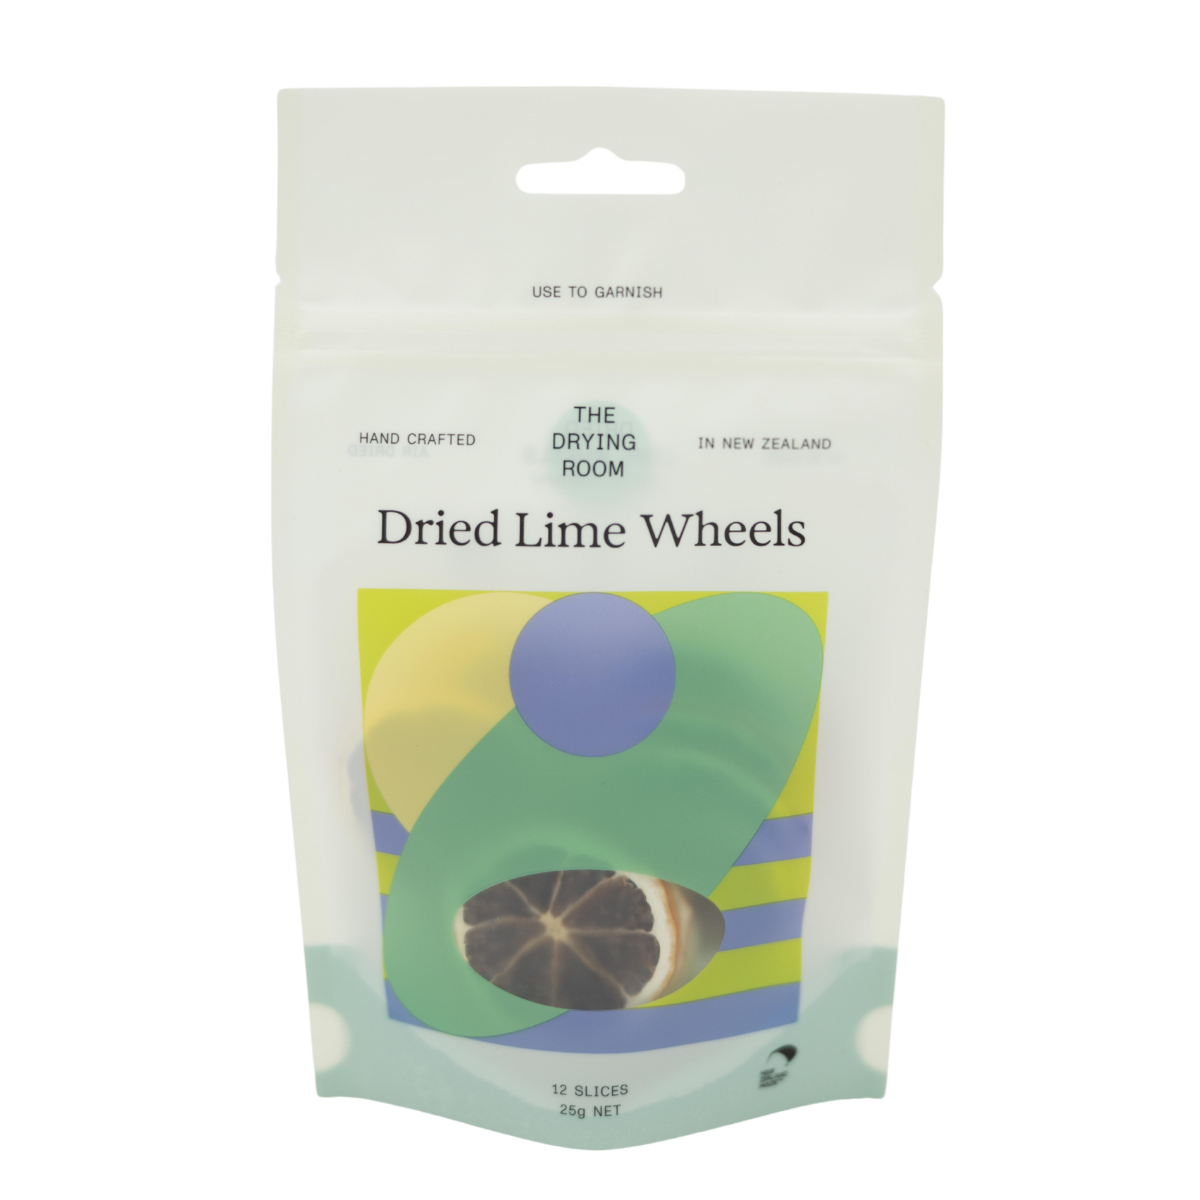 Dried Lime Wheels (12 slices)